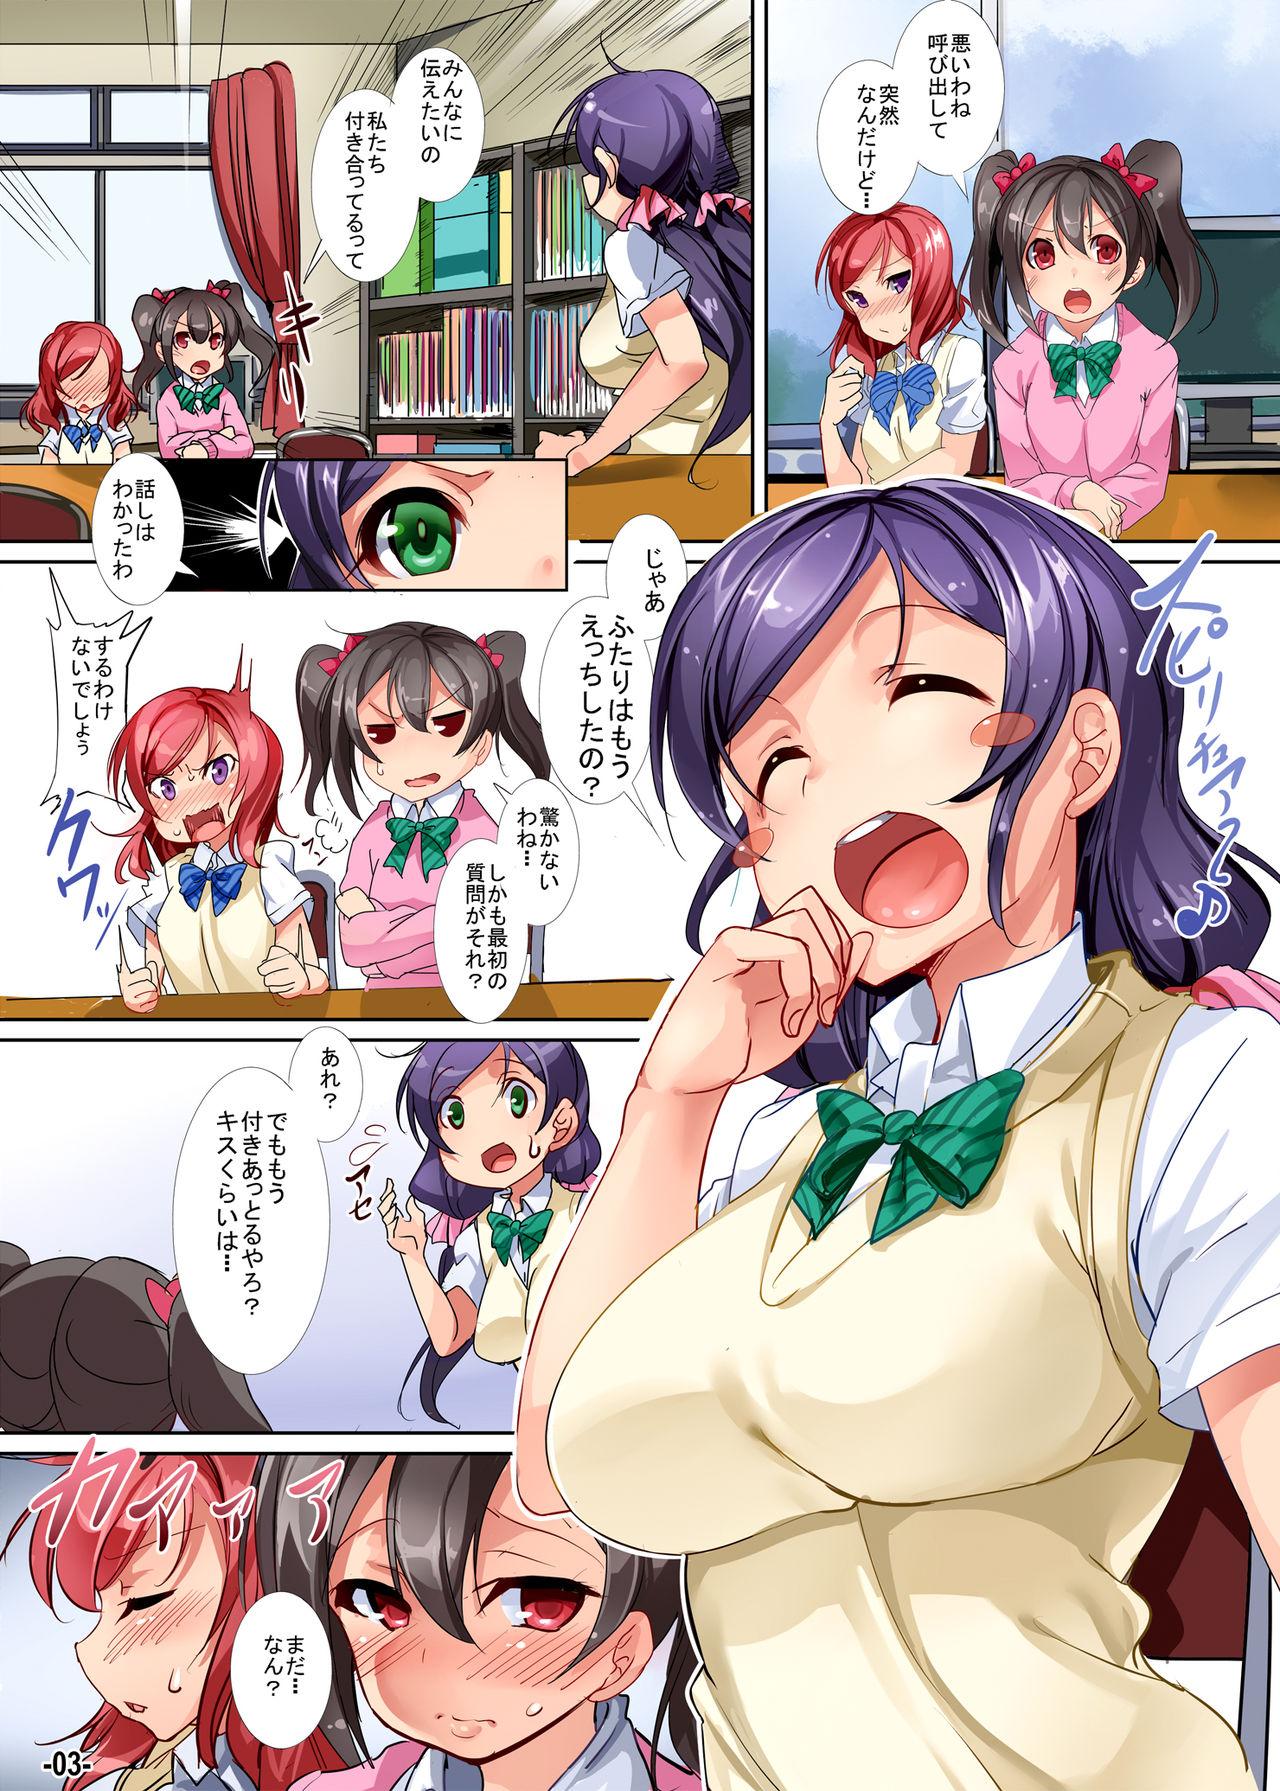 Office Sex Yuri Girls Project - Love live Soapy - Page 3